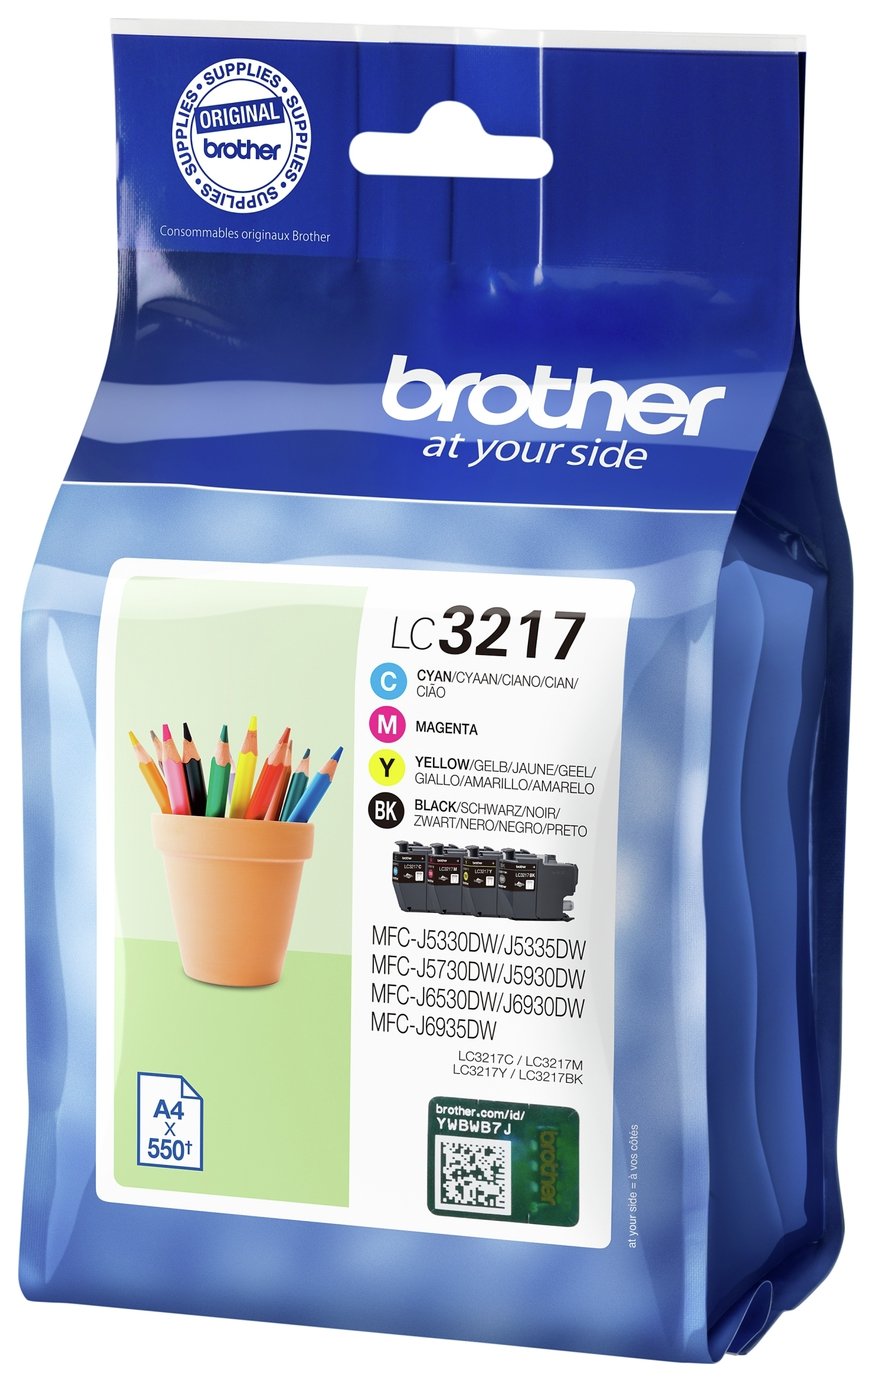 Brother LC3217 Ink Cartridges Review